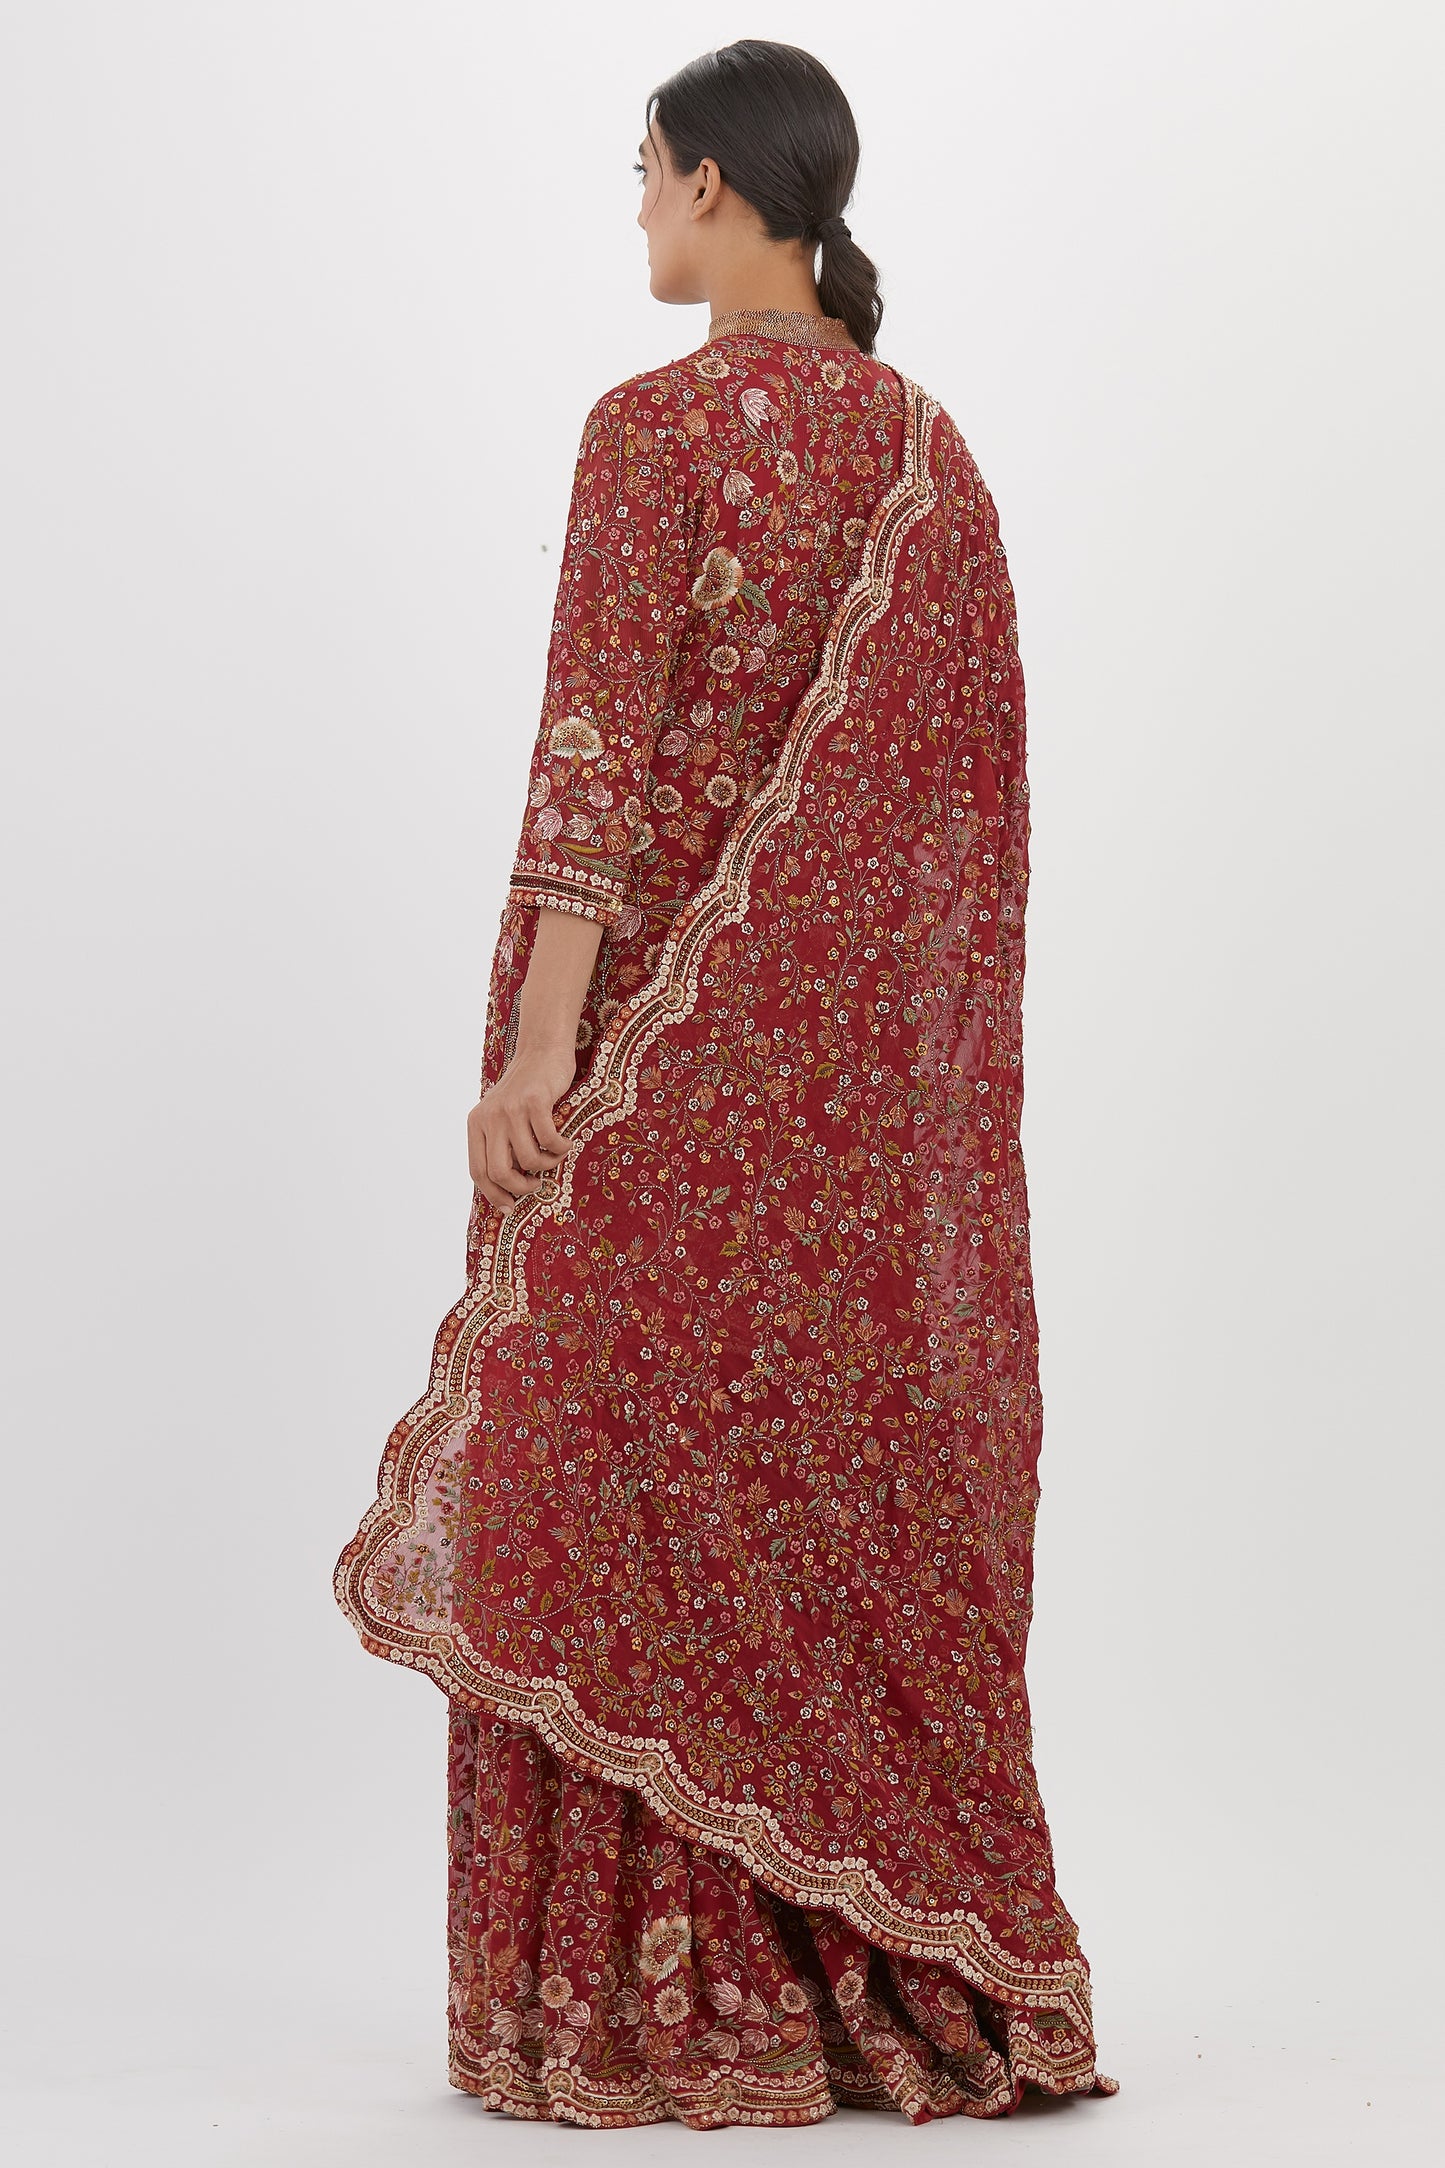 Gharara Set in intricate floral embroidery